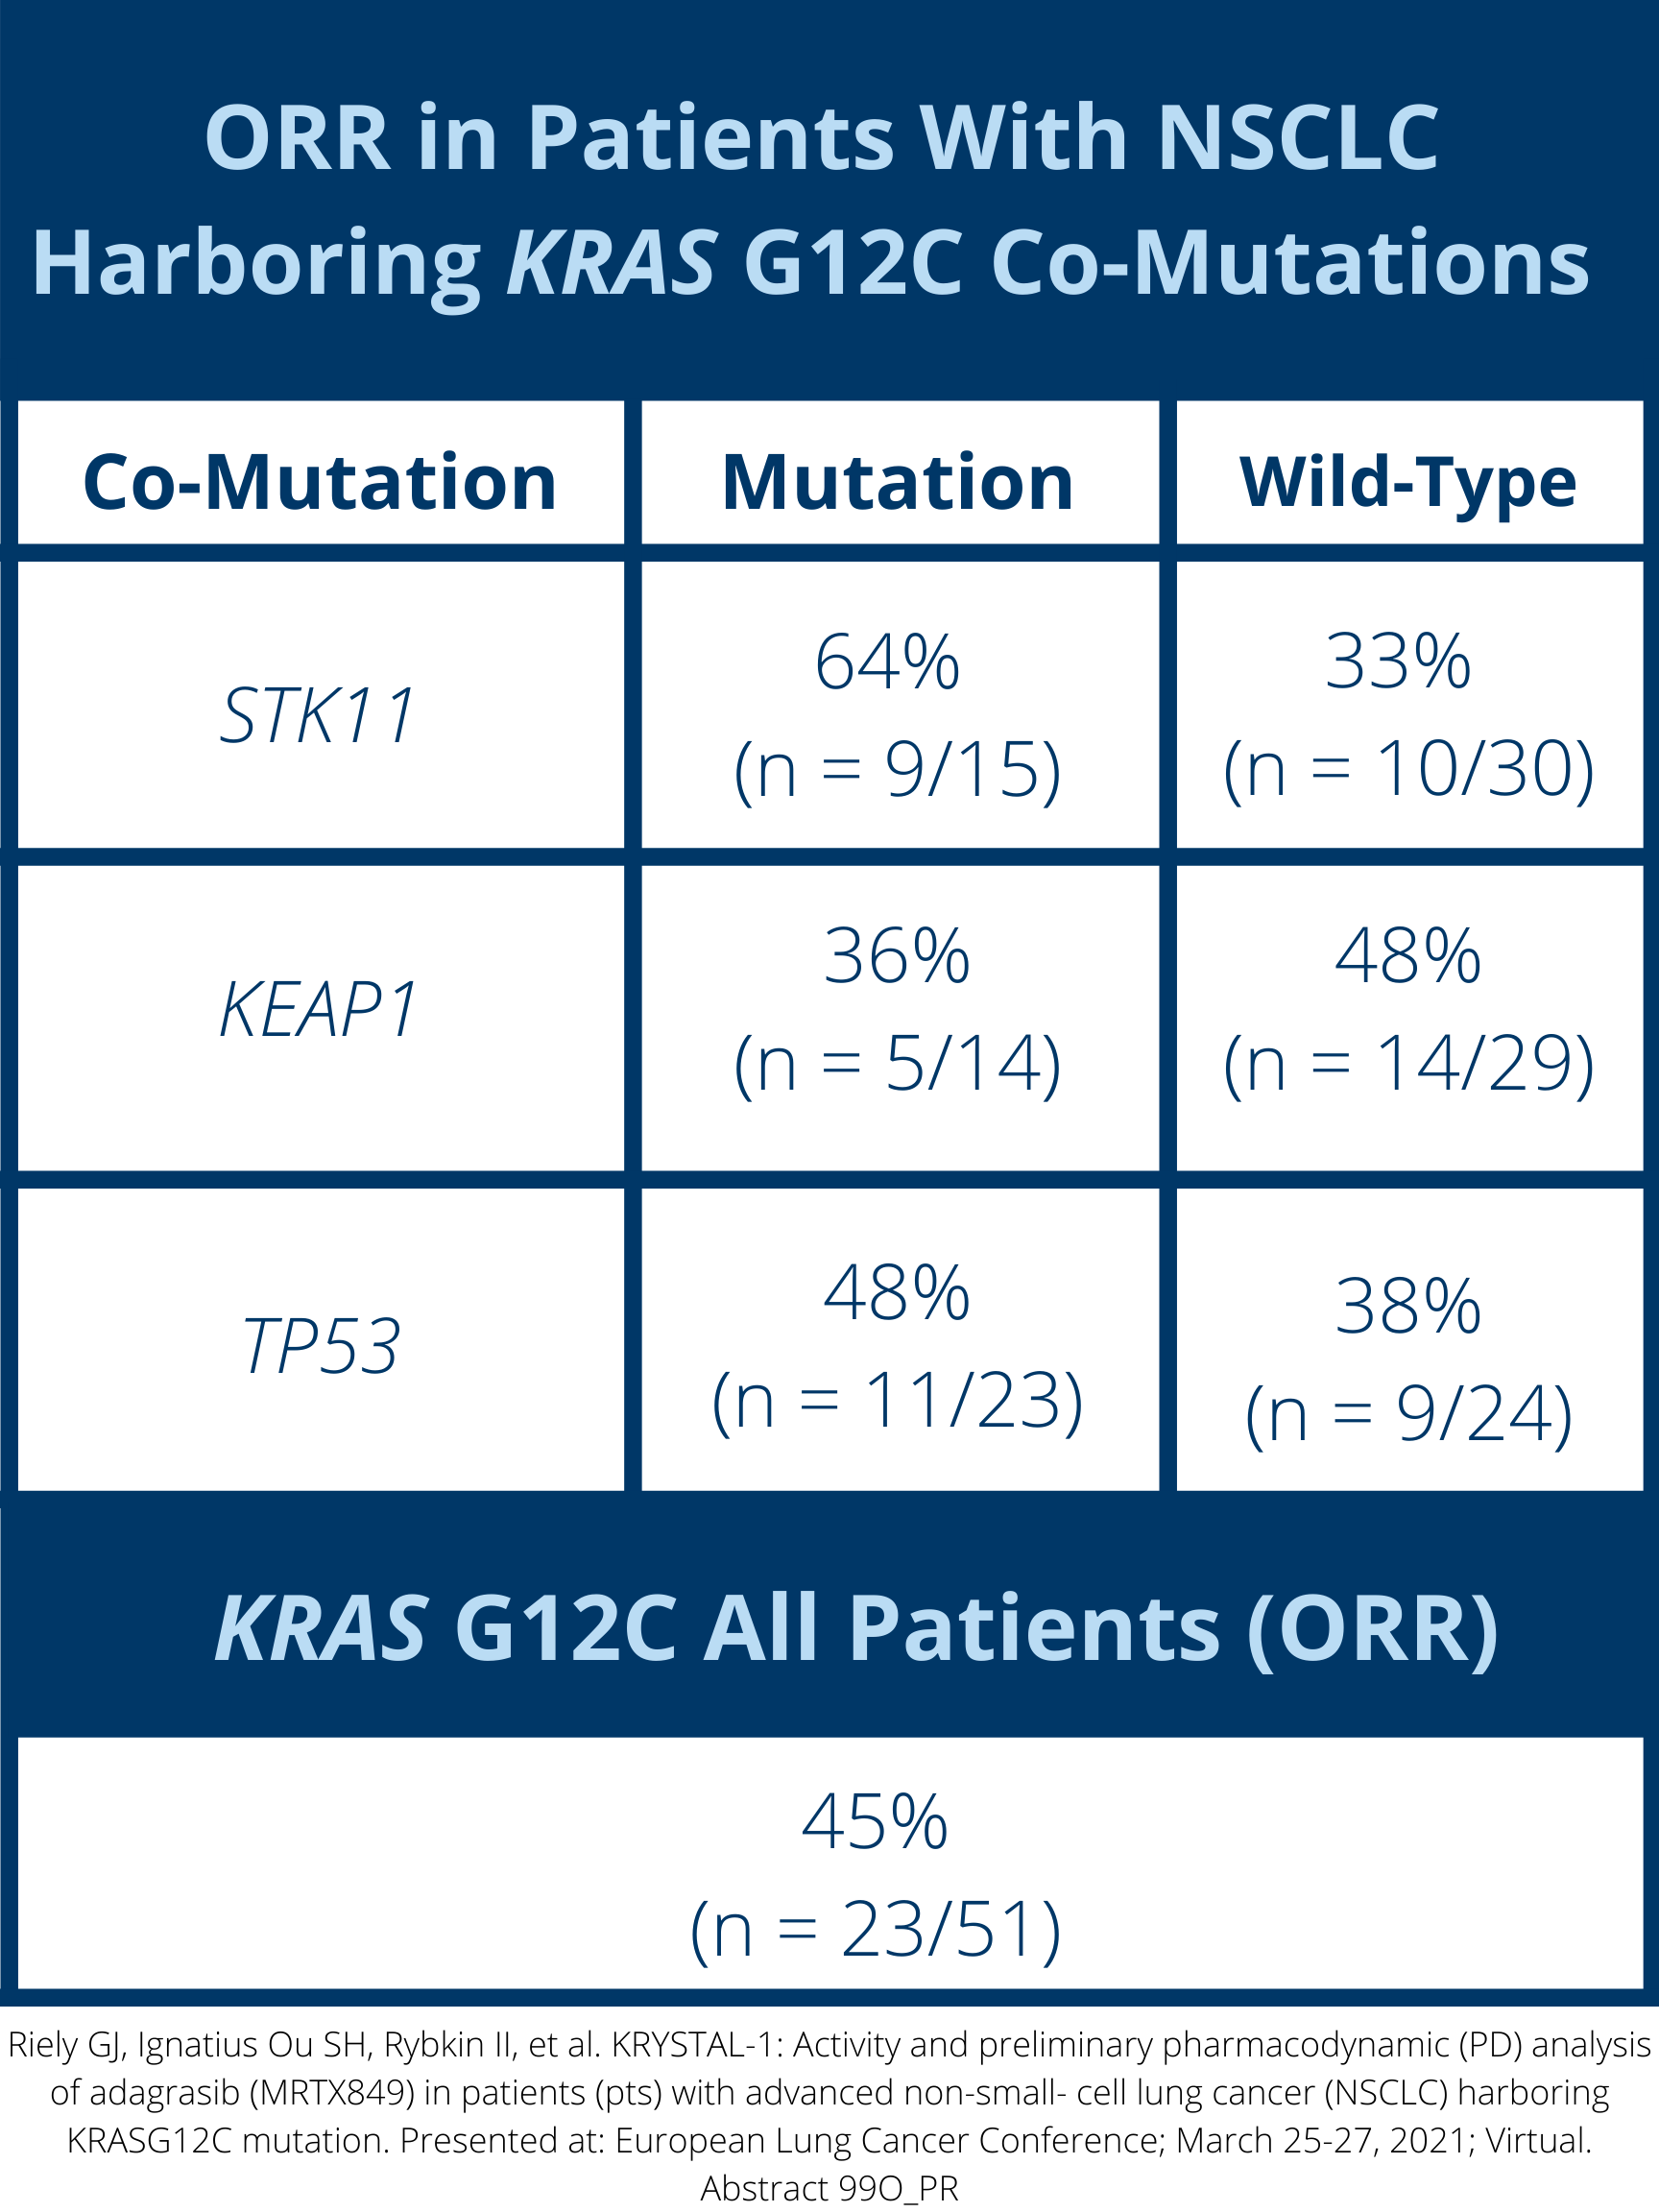 ORR in patients with NSCLC Harboring KRAS G12C Co-Mutations